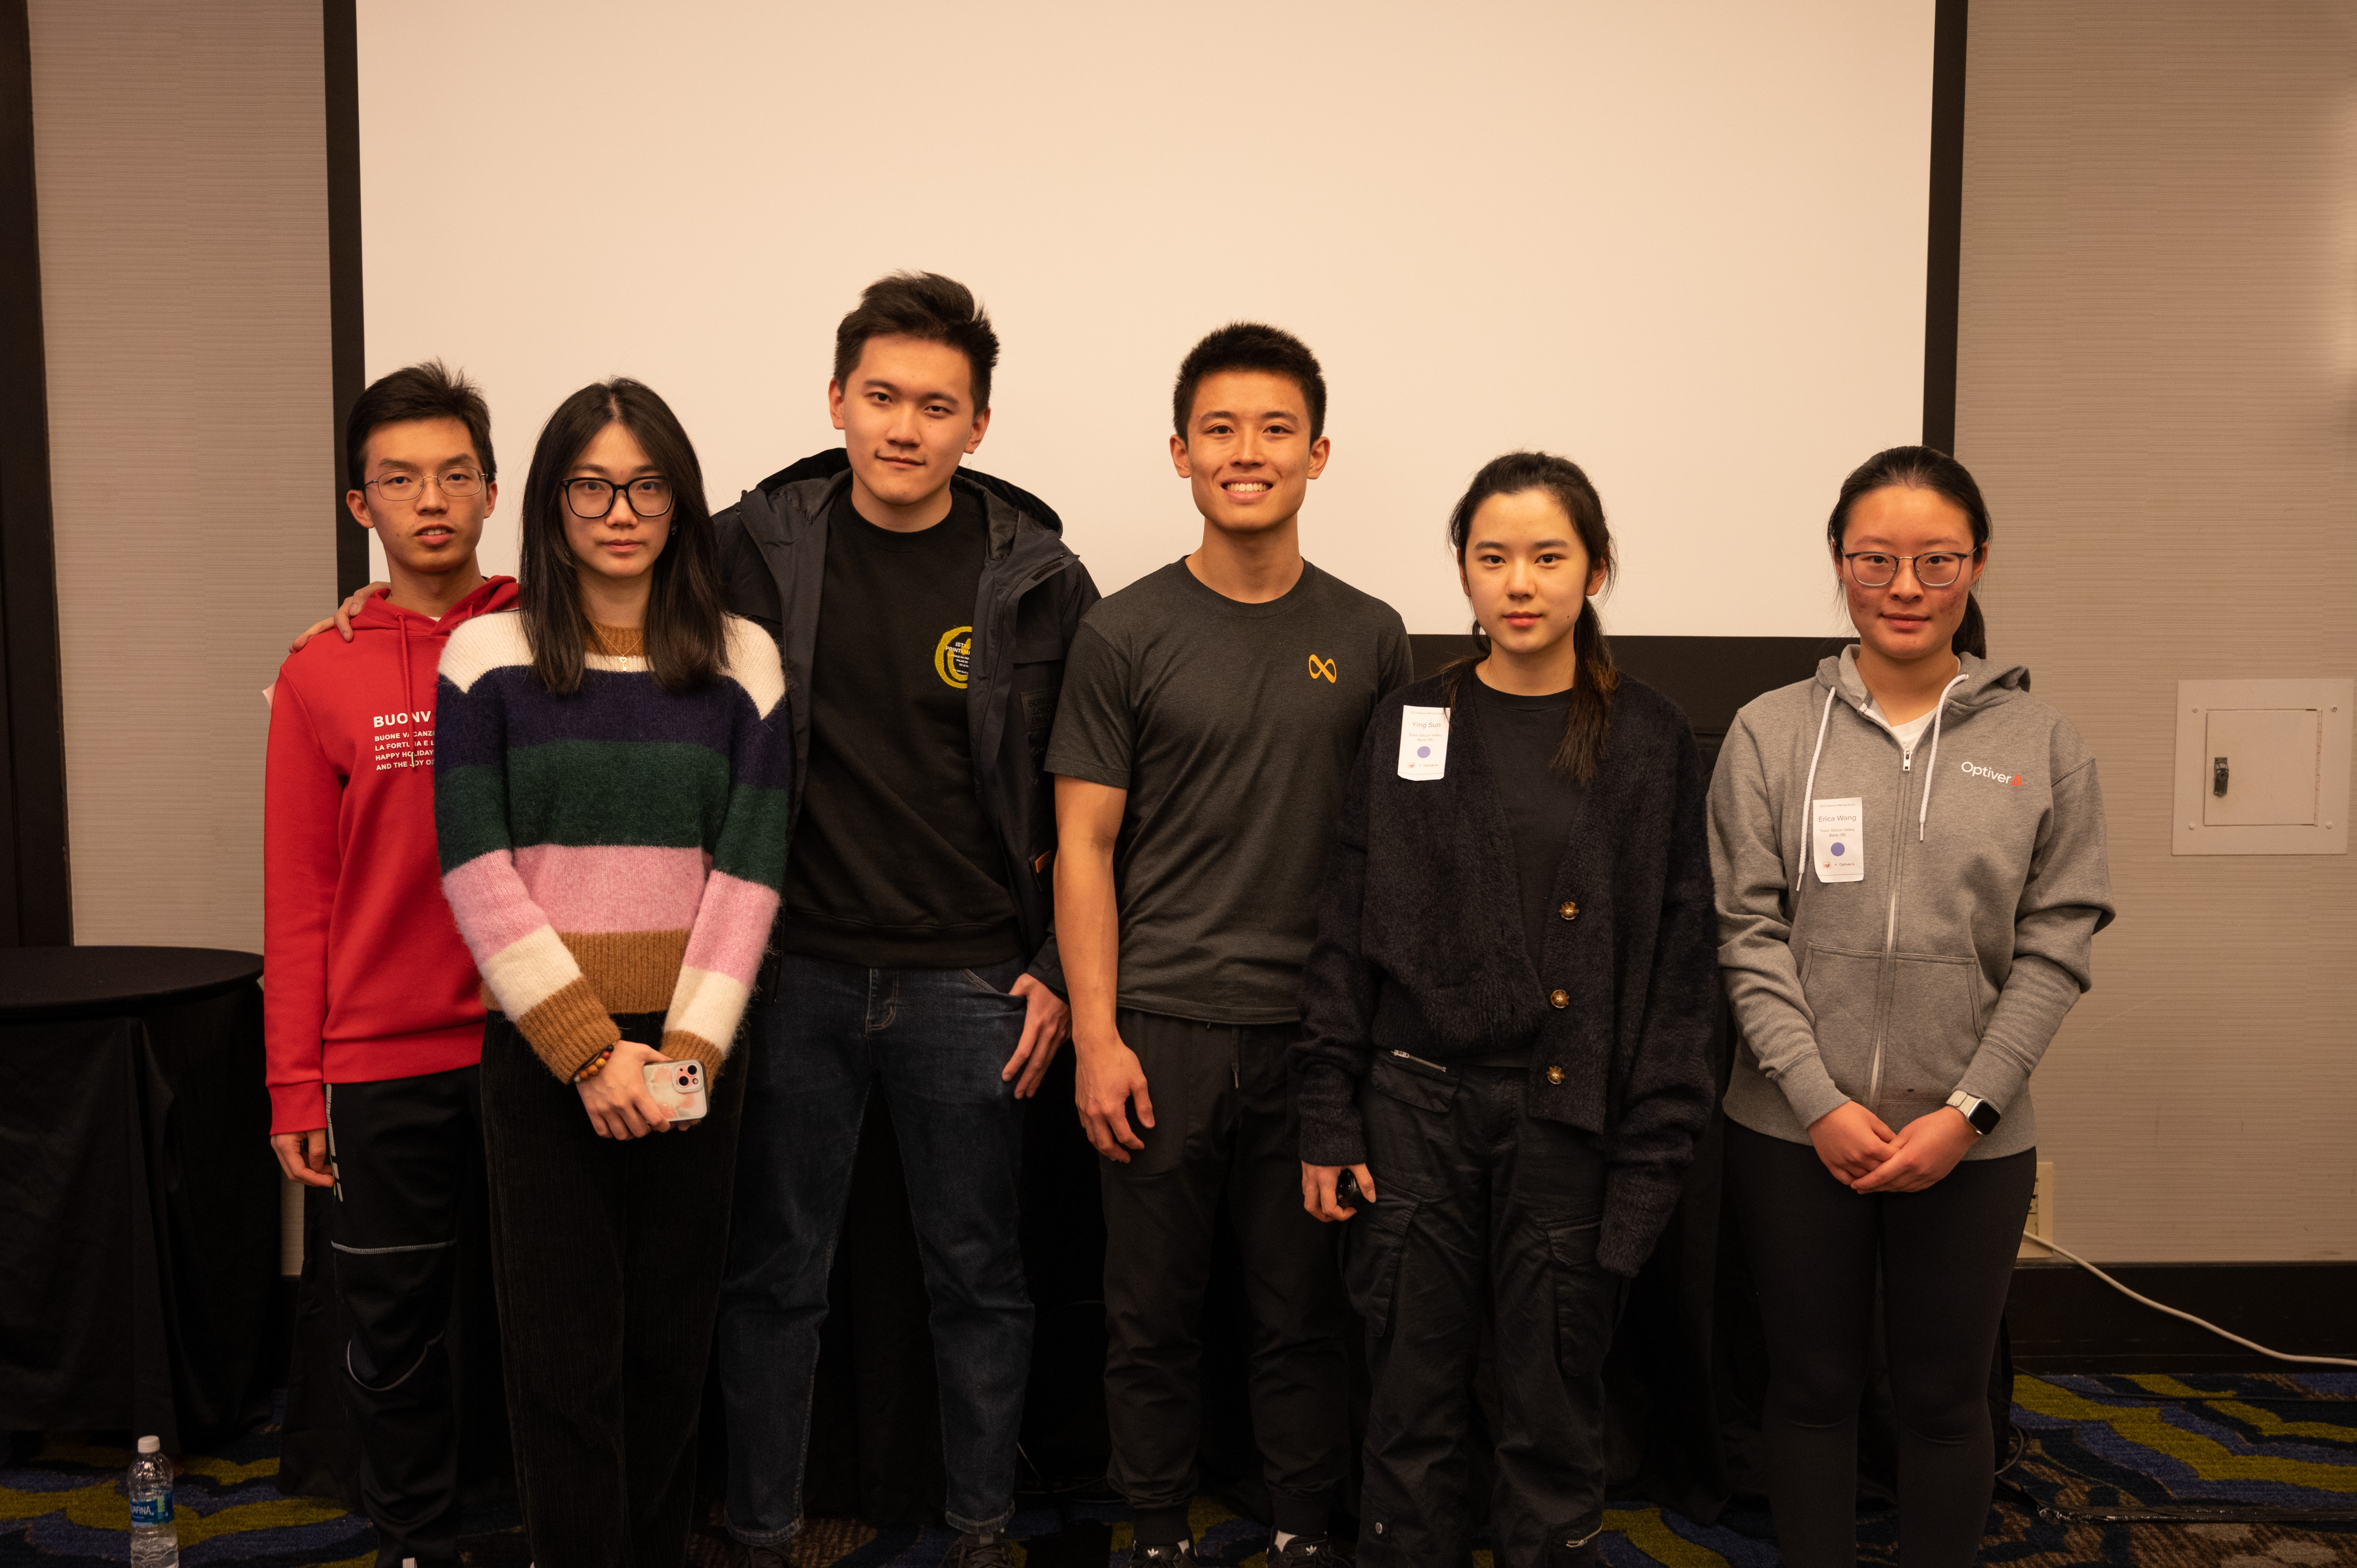 Team Silicon Valley Bank from left to right: Ricky Huang, Wendy Li, Fenglin Wang, Richard Zhan, Ying Sun and Erica Wang